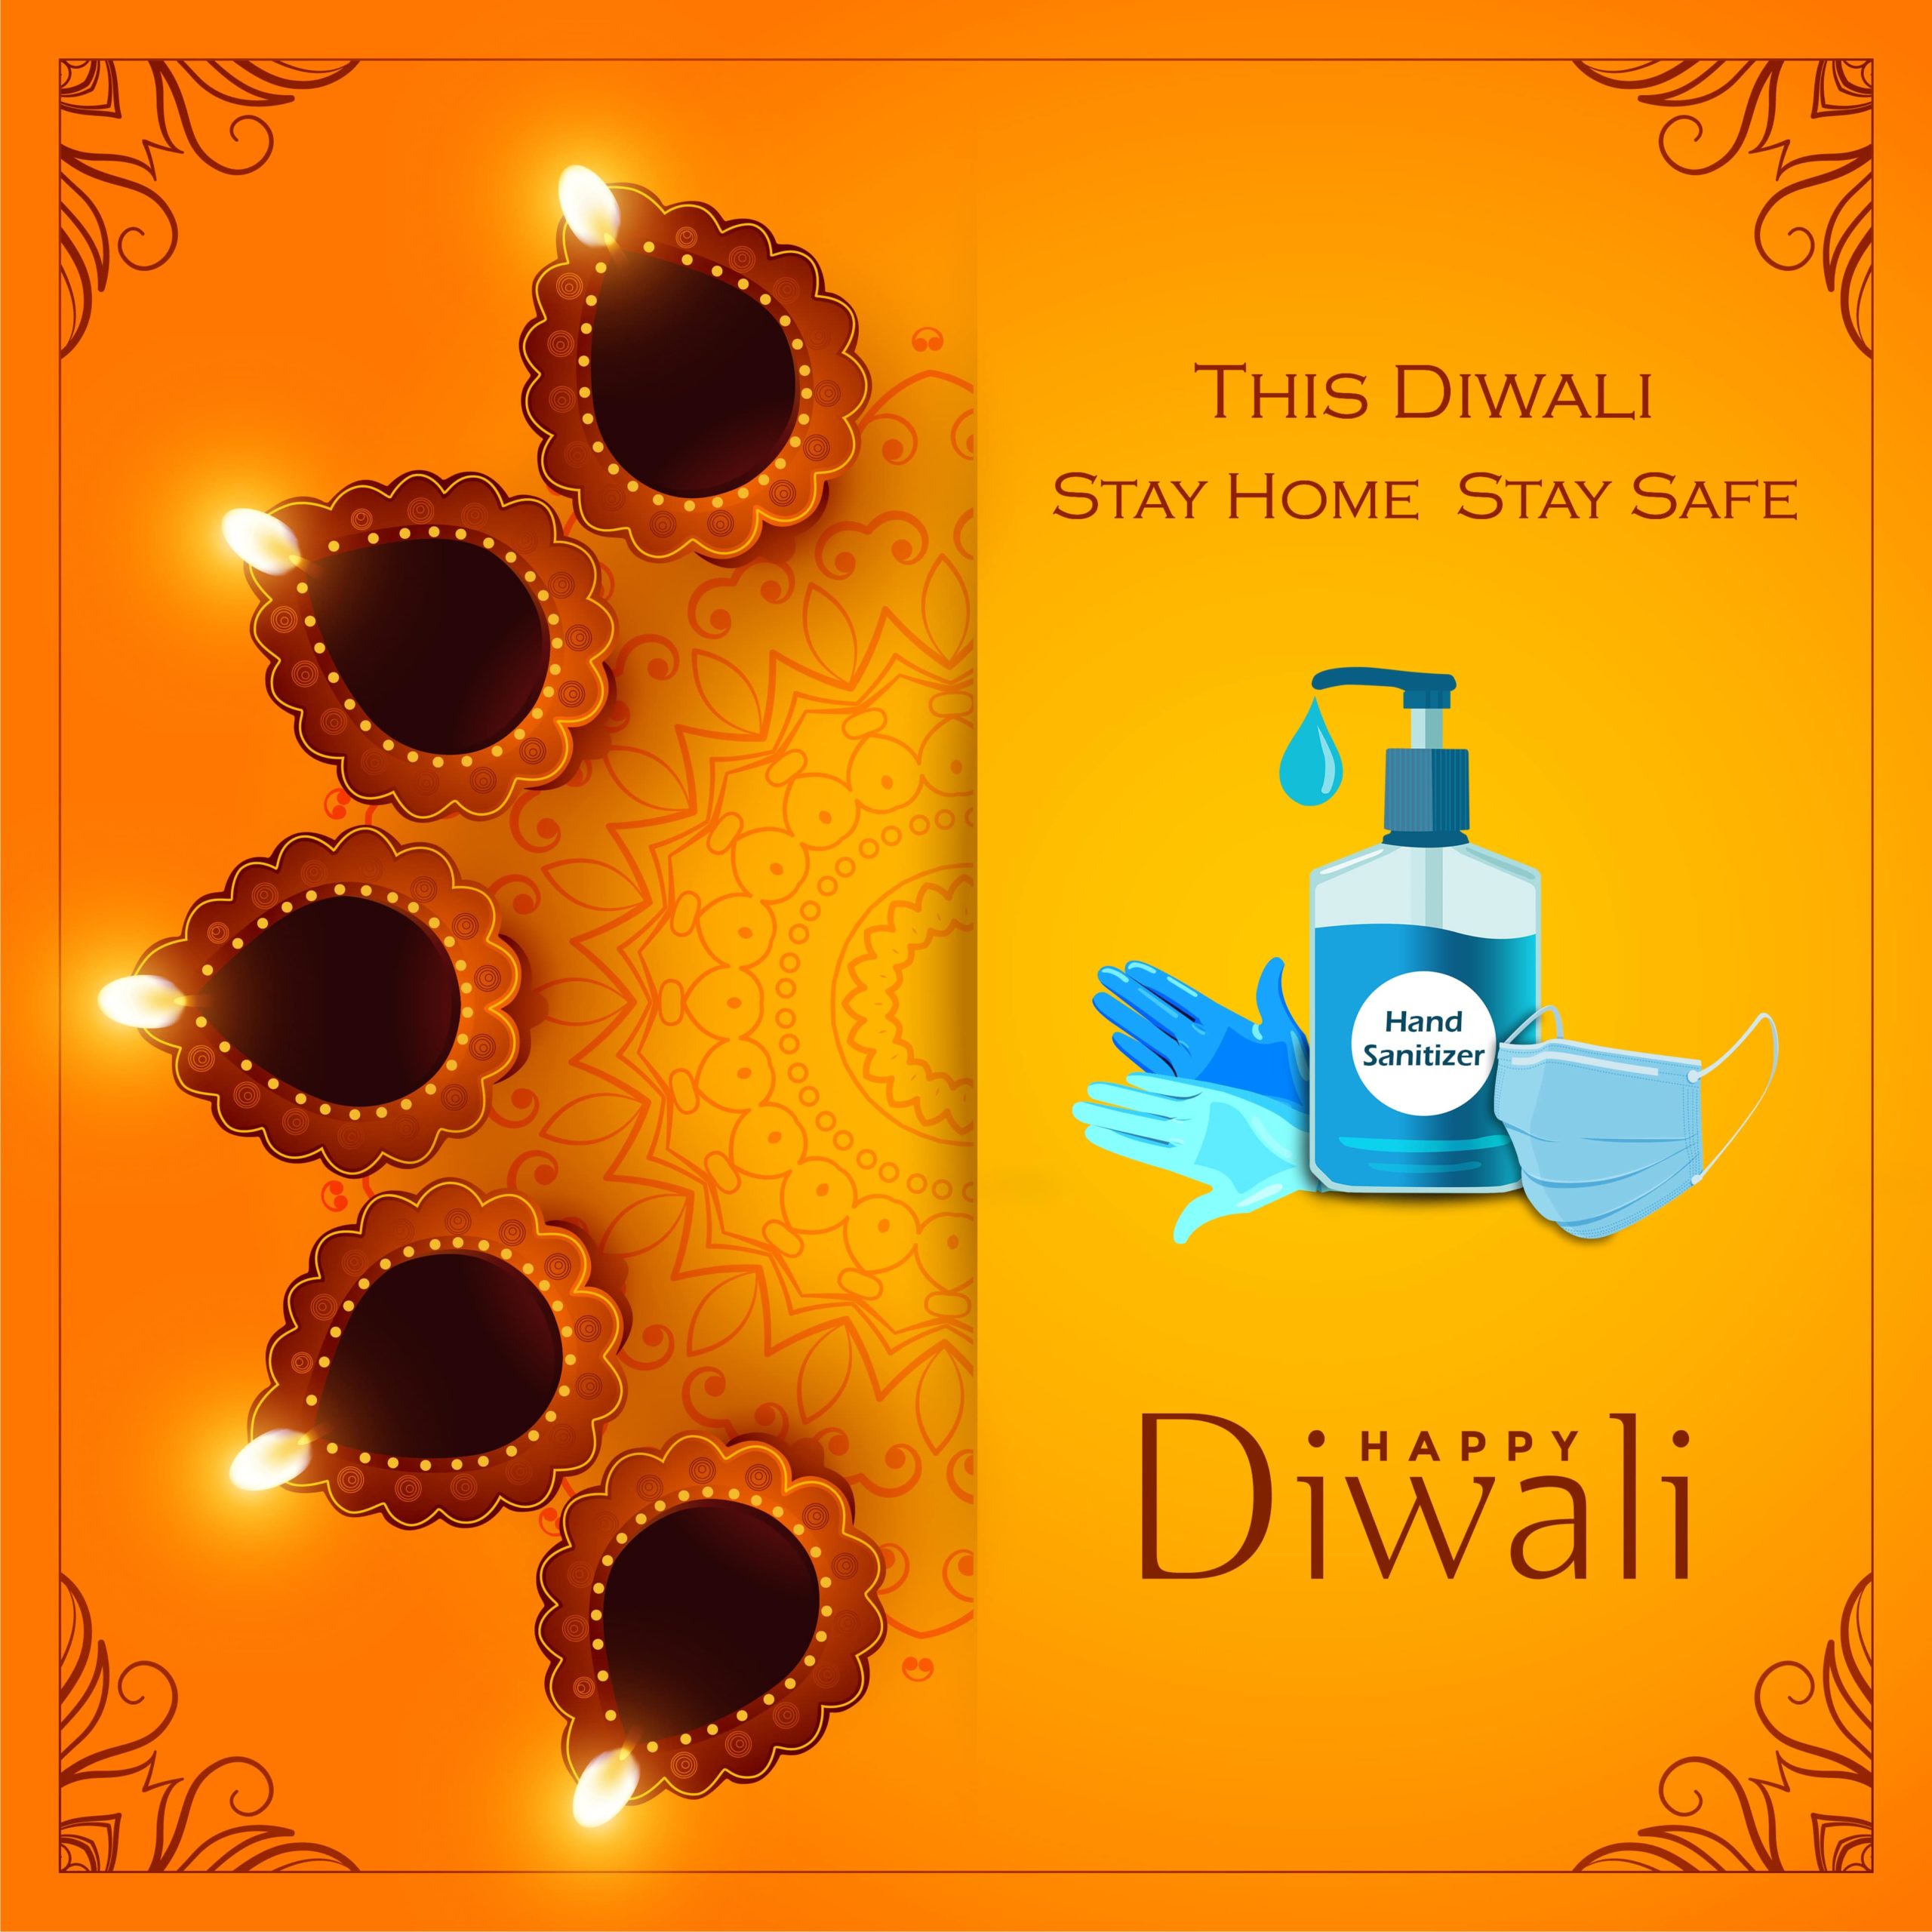 happy diwali 2021 images and wishes